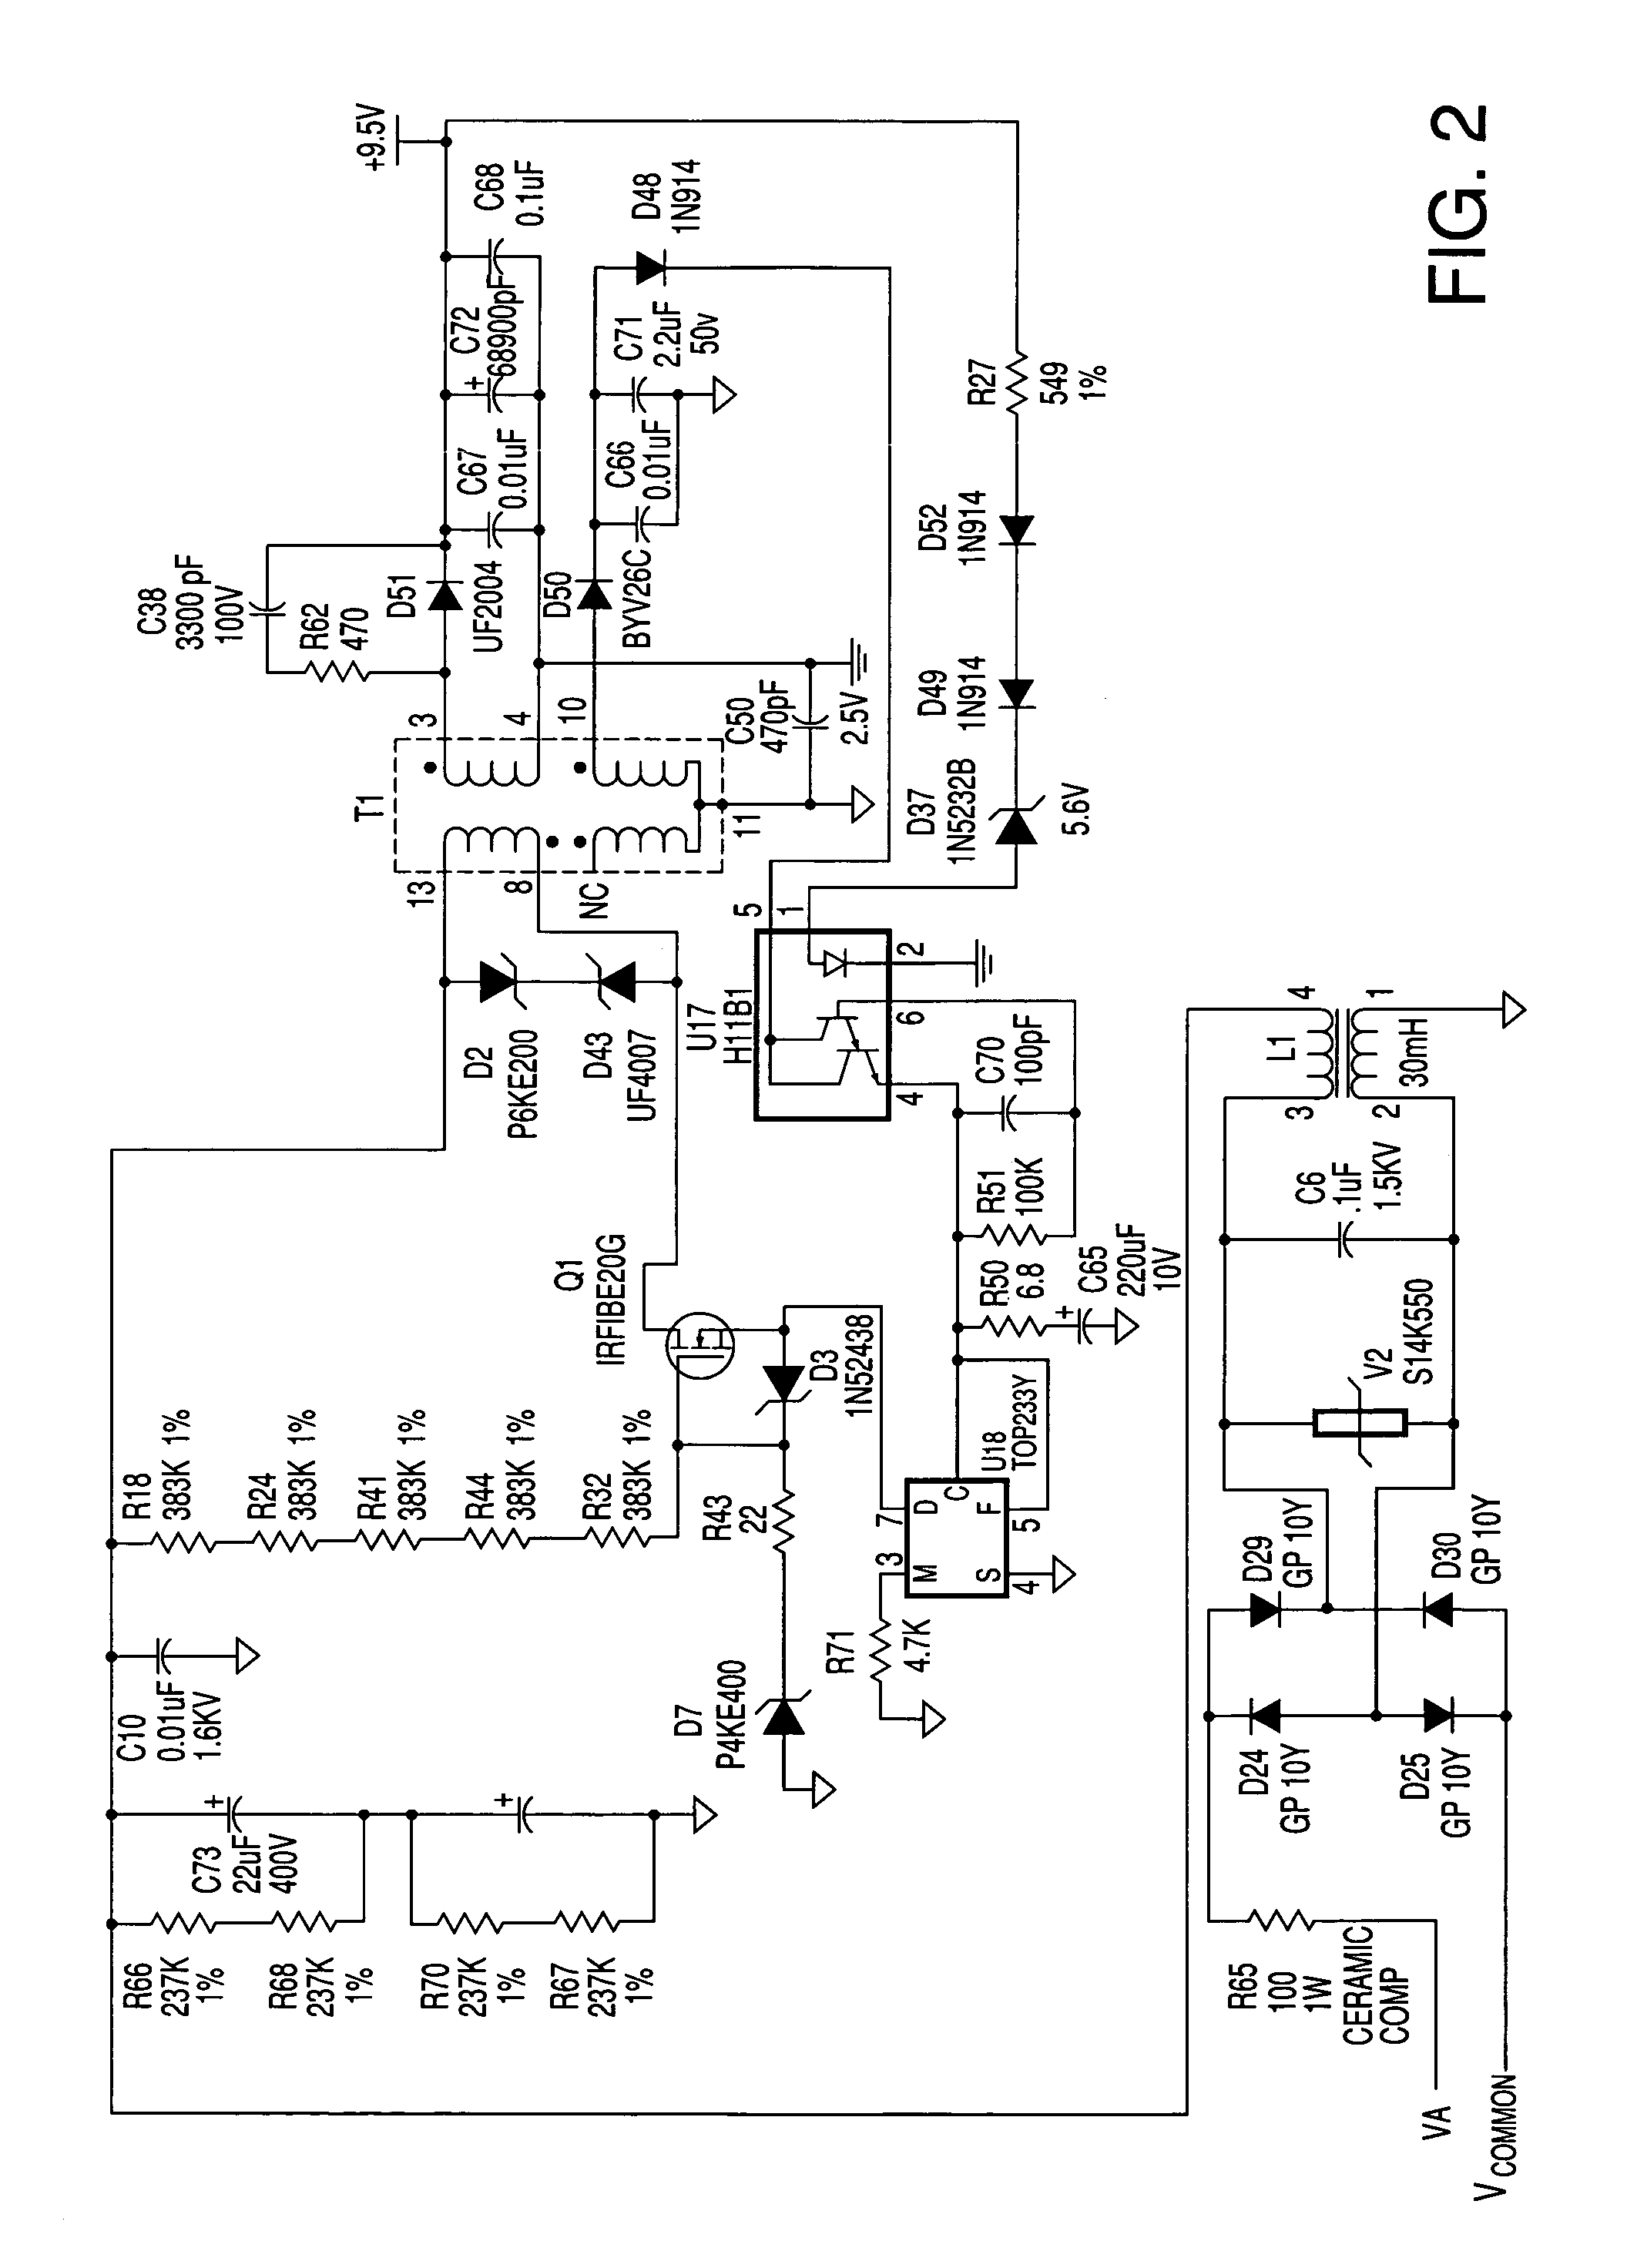 Electronic meter with enhanced thermally managed communications systems and methods